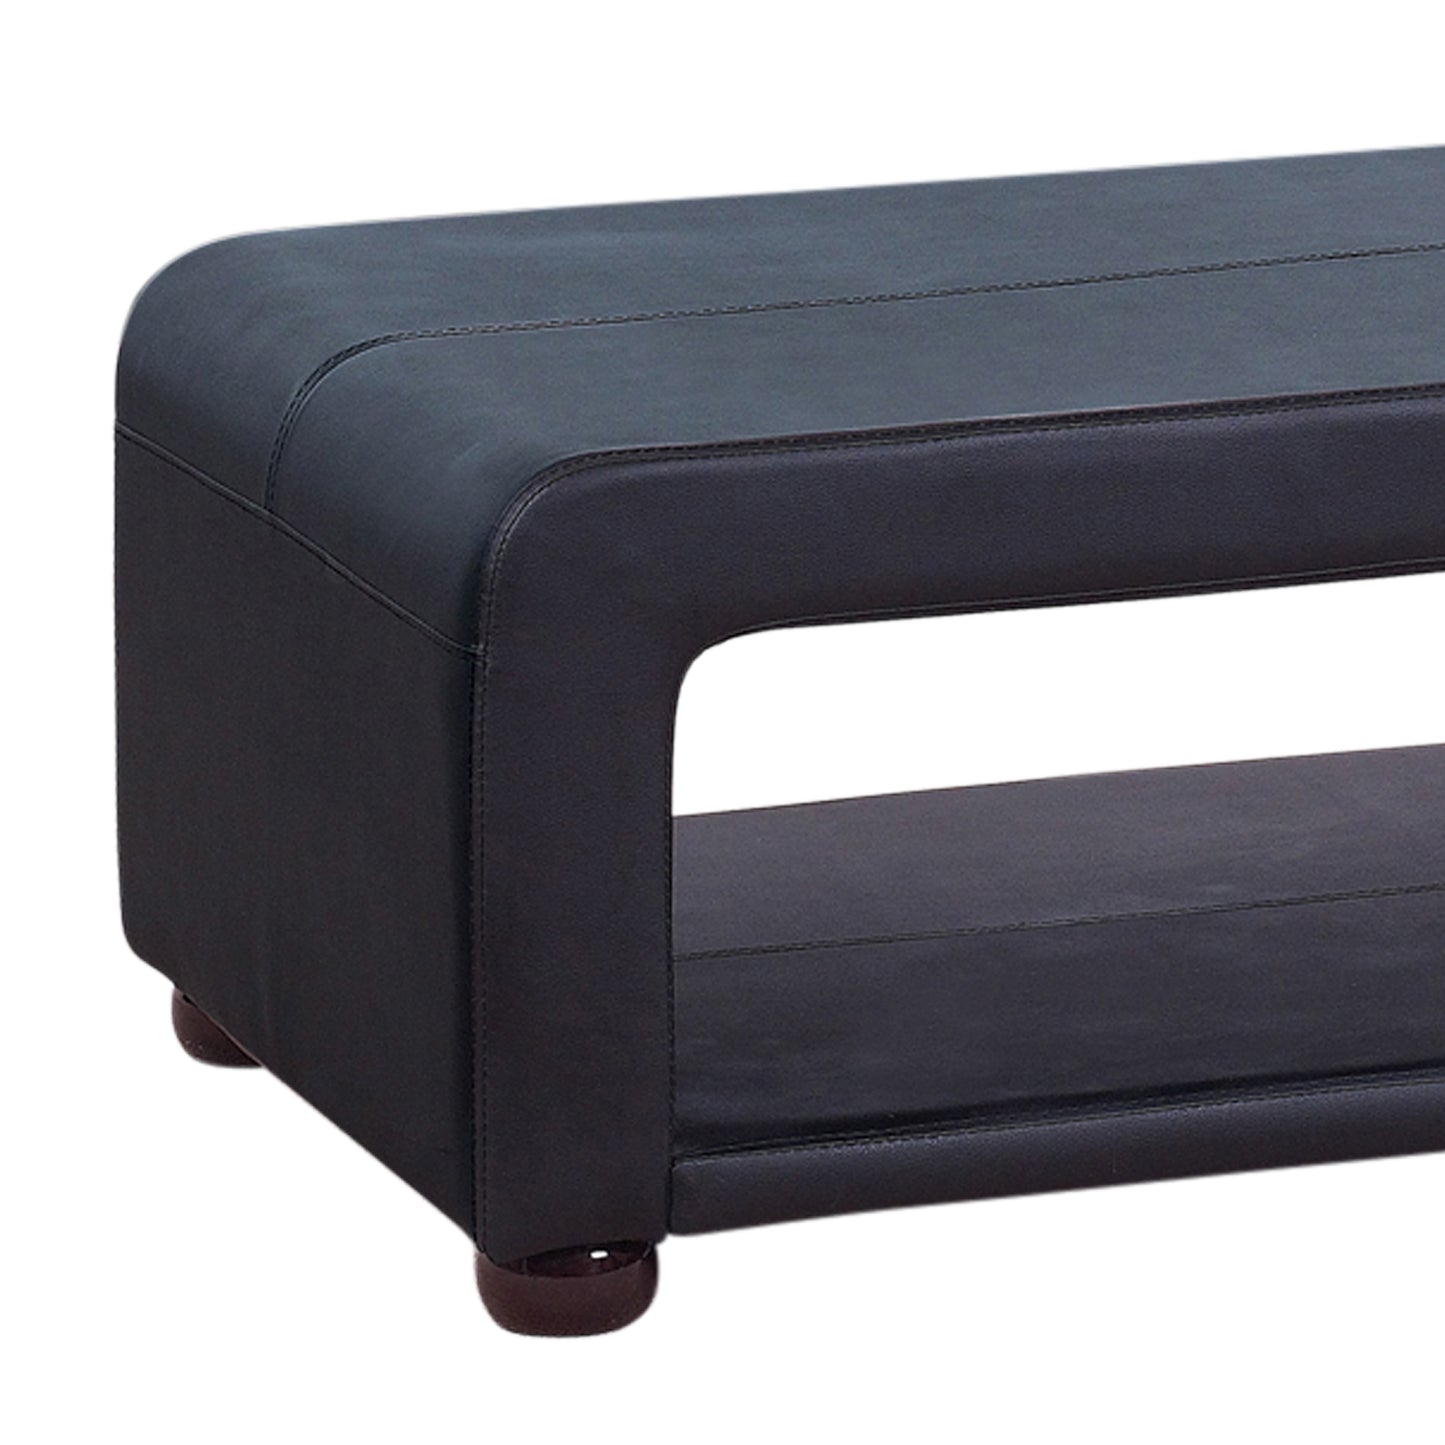 Coffee Table Upholstered PU Leather in Black Colour with open storage - image3